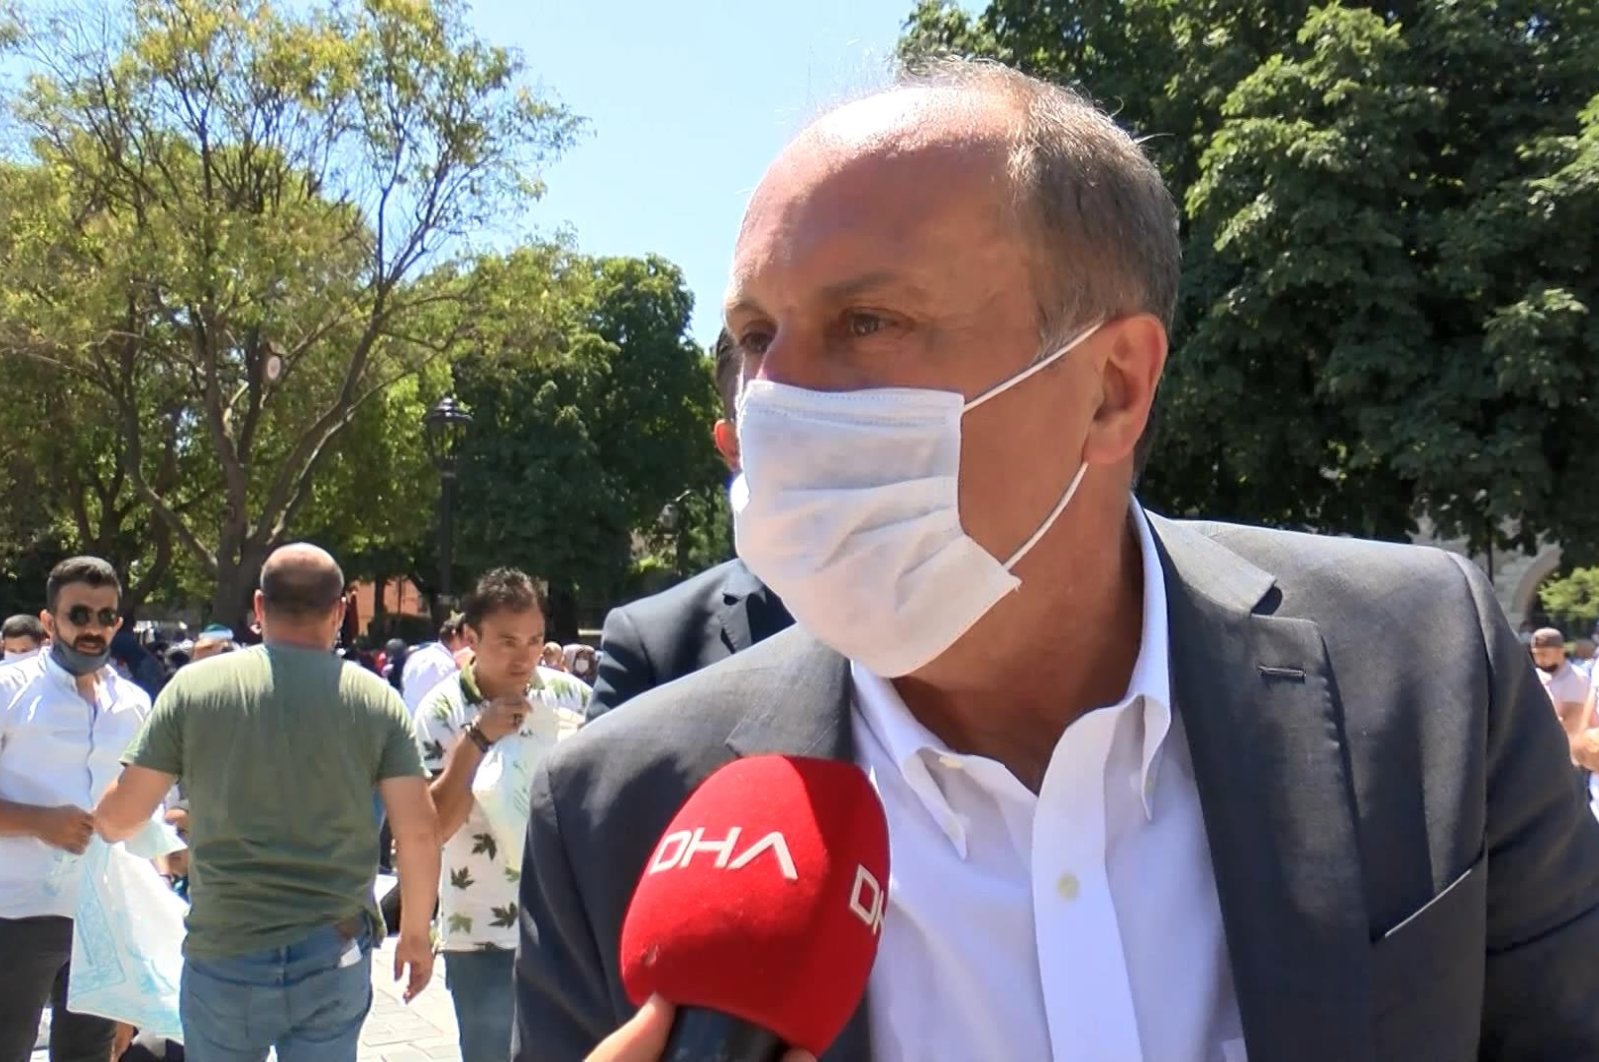 CHP's former deputy Ince speaks to reporters after a Friday prayer in the square near the Hagia Sophia Grand Mosque, Istanbul, July 24, 2020. (DHA Photo)